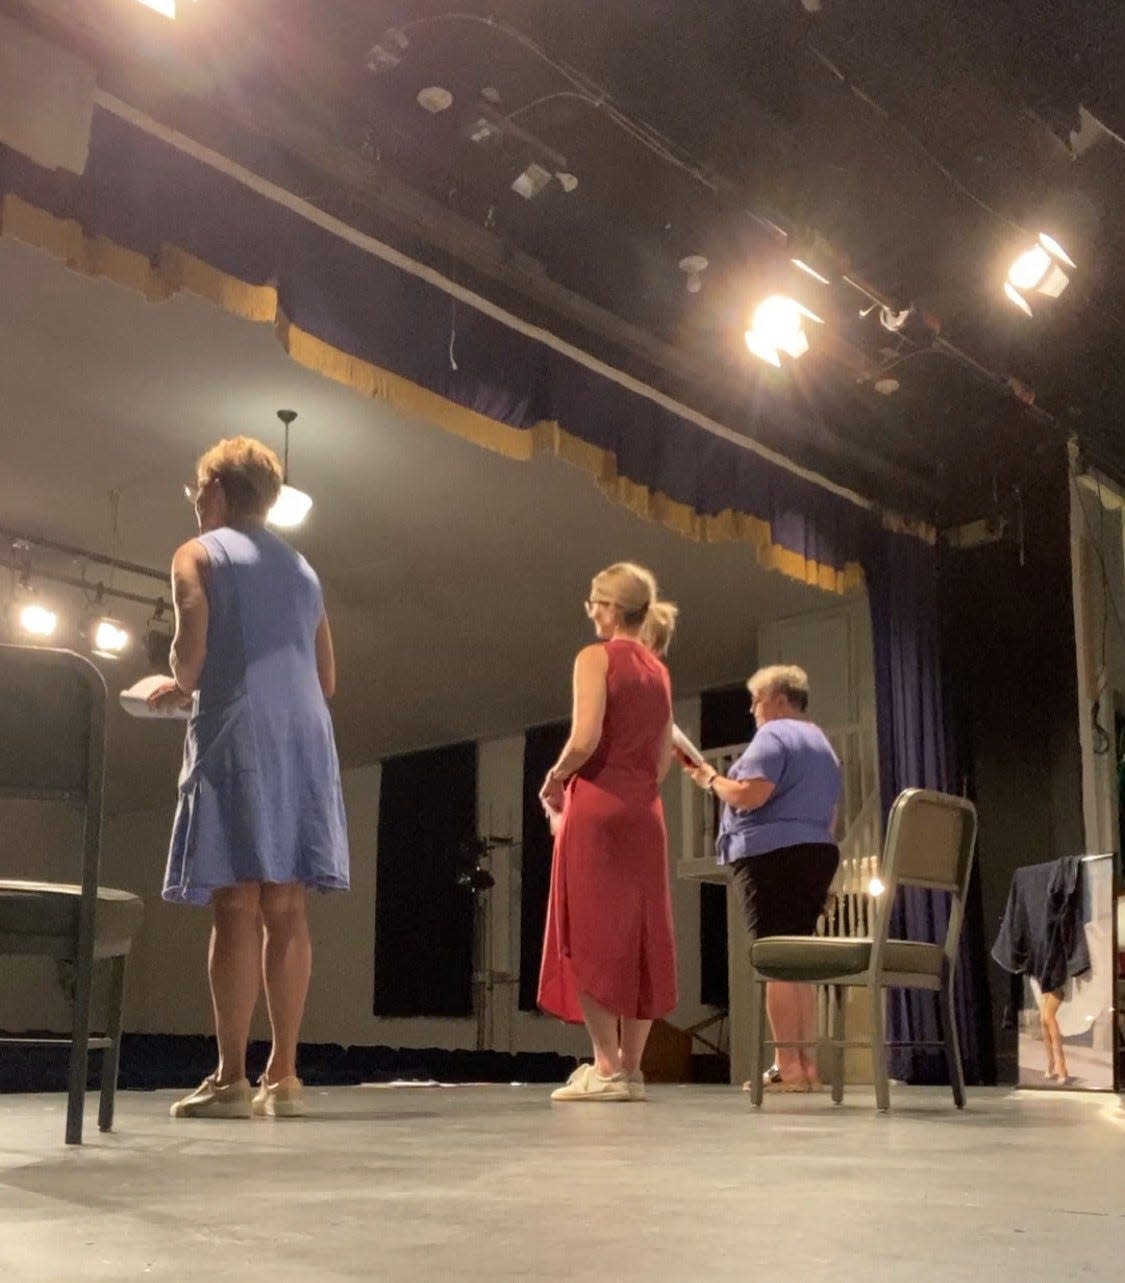 The Bartow Community Club is looking for creative individuals to join a newly formed theater guild to breathe new life into the upcoming Schoolhouse Players productions.